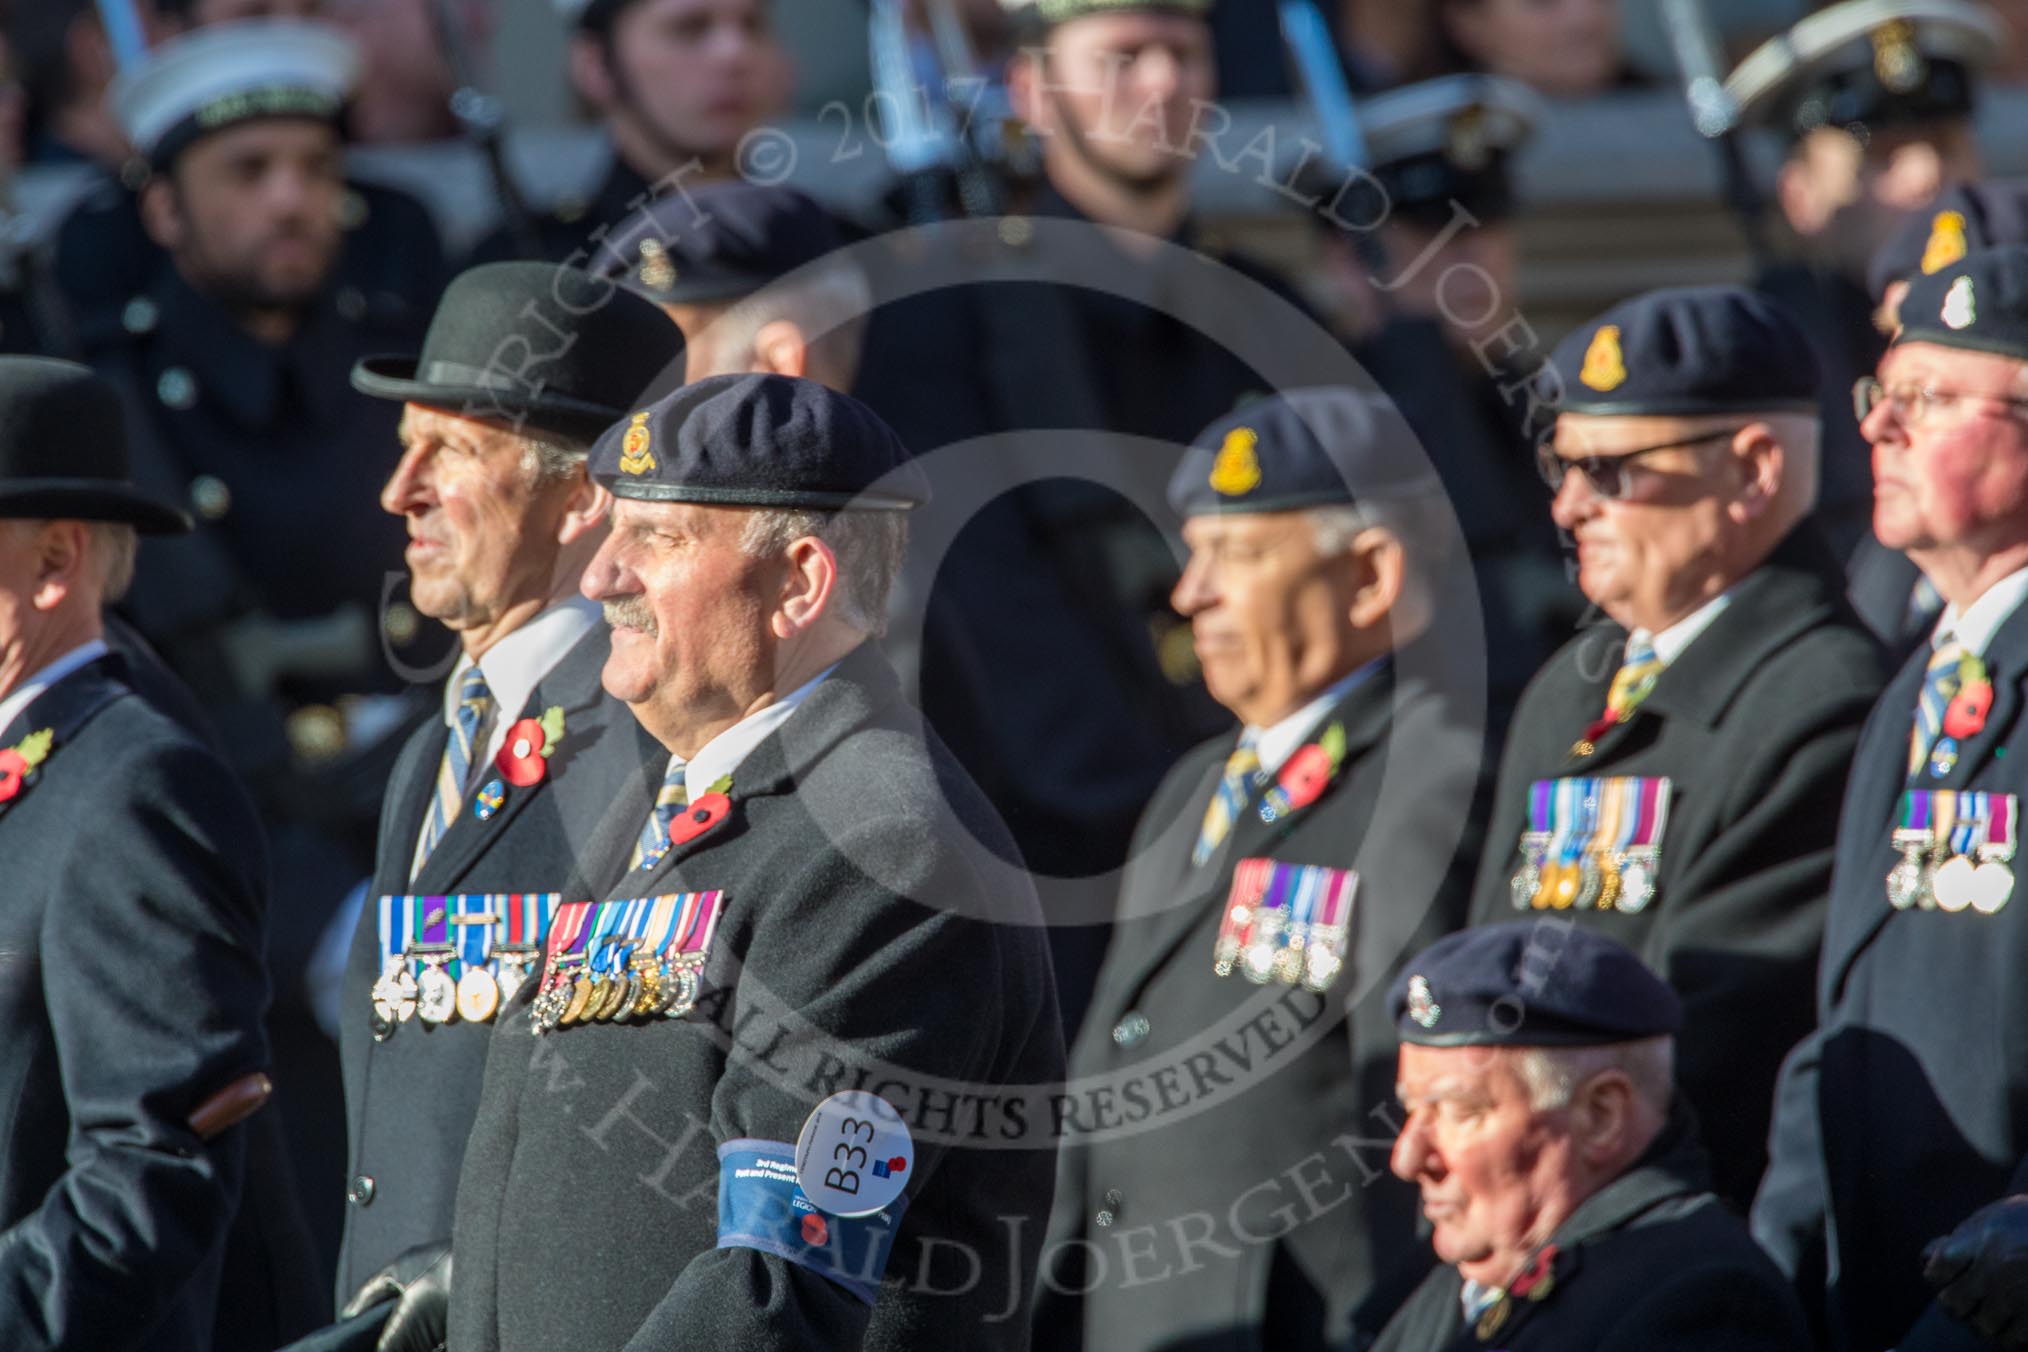 3rd Regiment Royal Horse Artillery Past and Present(Group B33, 70 members) during the Royal British Legion March Past on Remembrance Sunday at the Cenotaph, Whitehall, Westminster, London, 11 November 2018, 12:12..